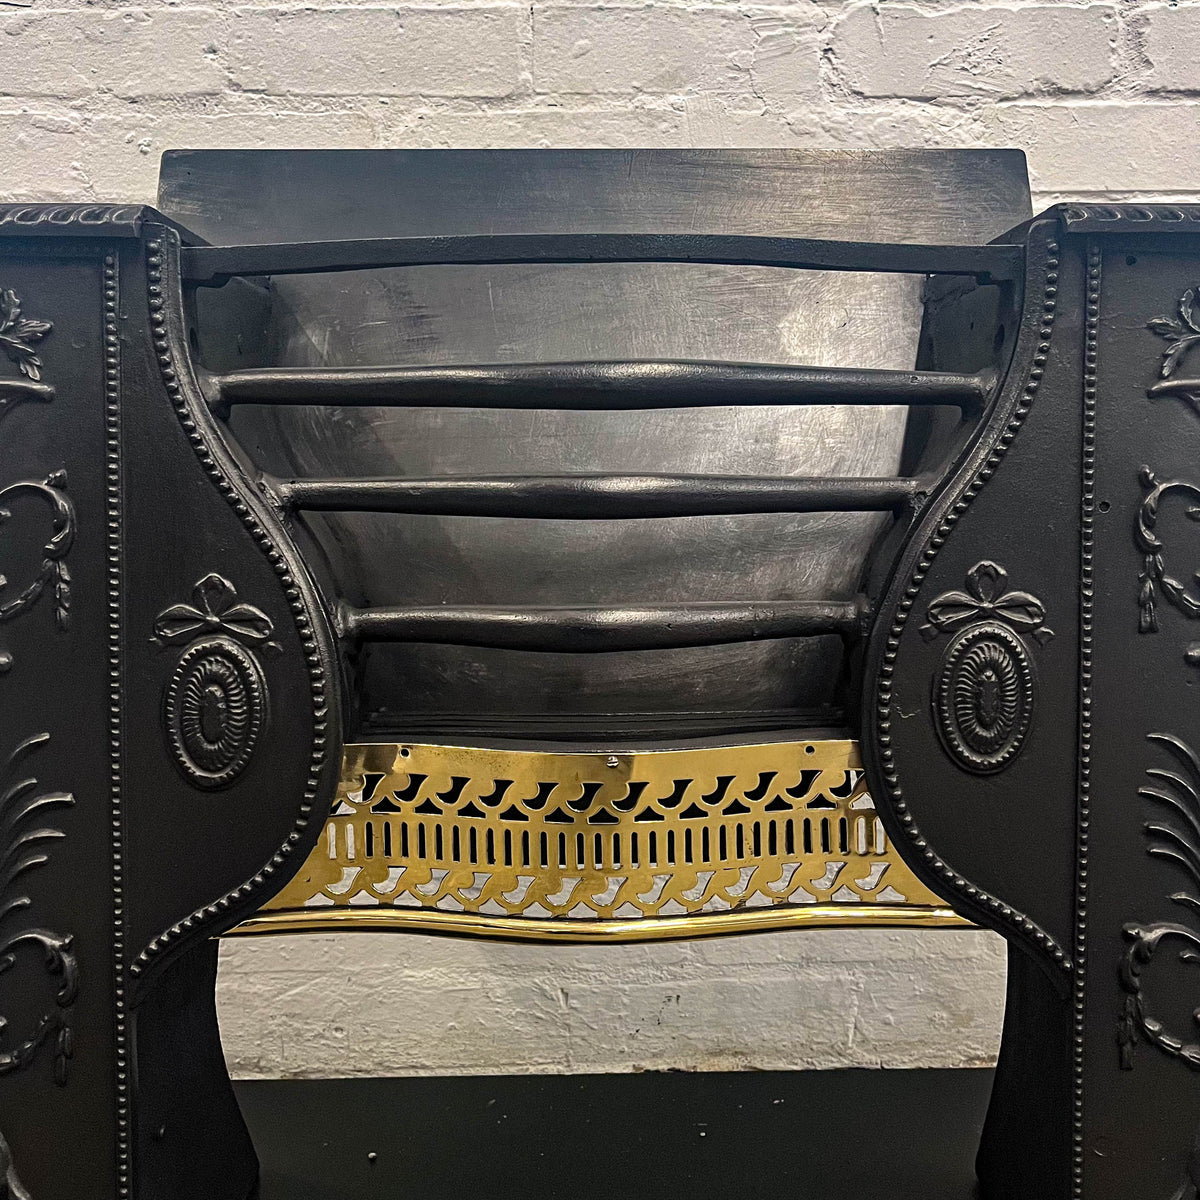 Regency Antique Hob Grate In The Manner of Robert Adam | The Architectural Forum